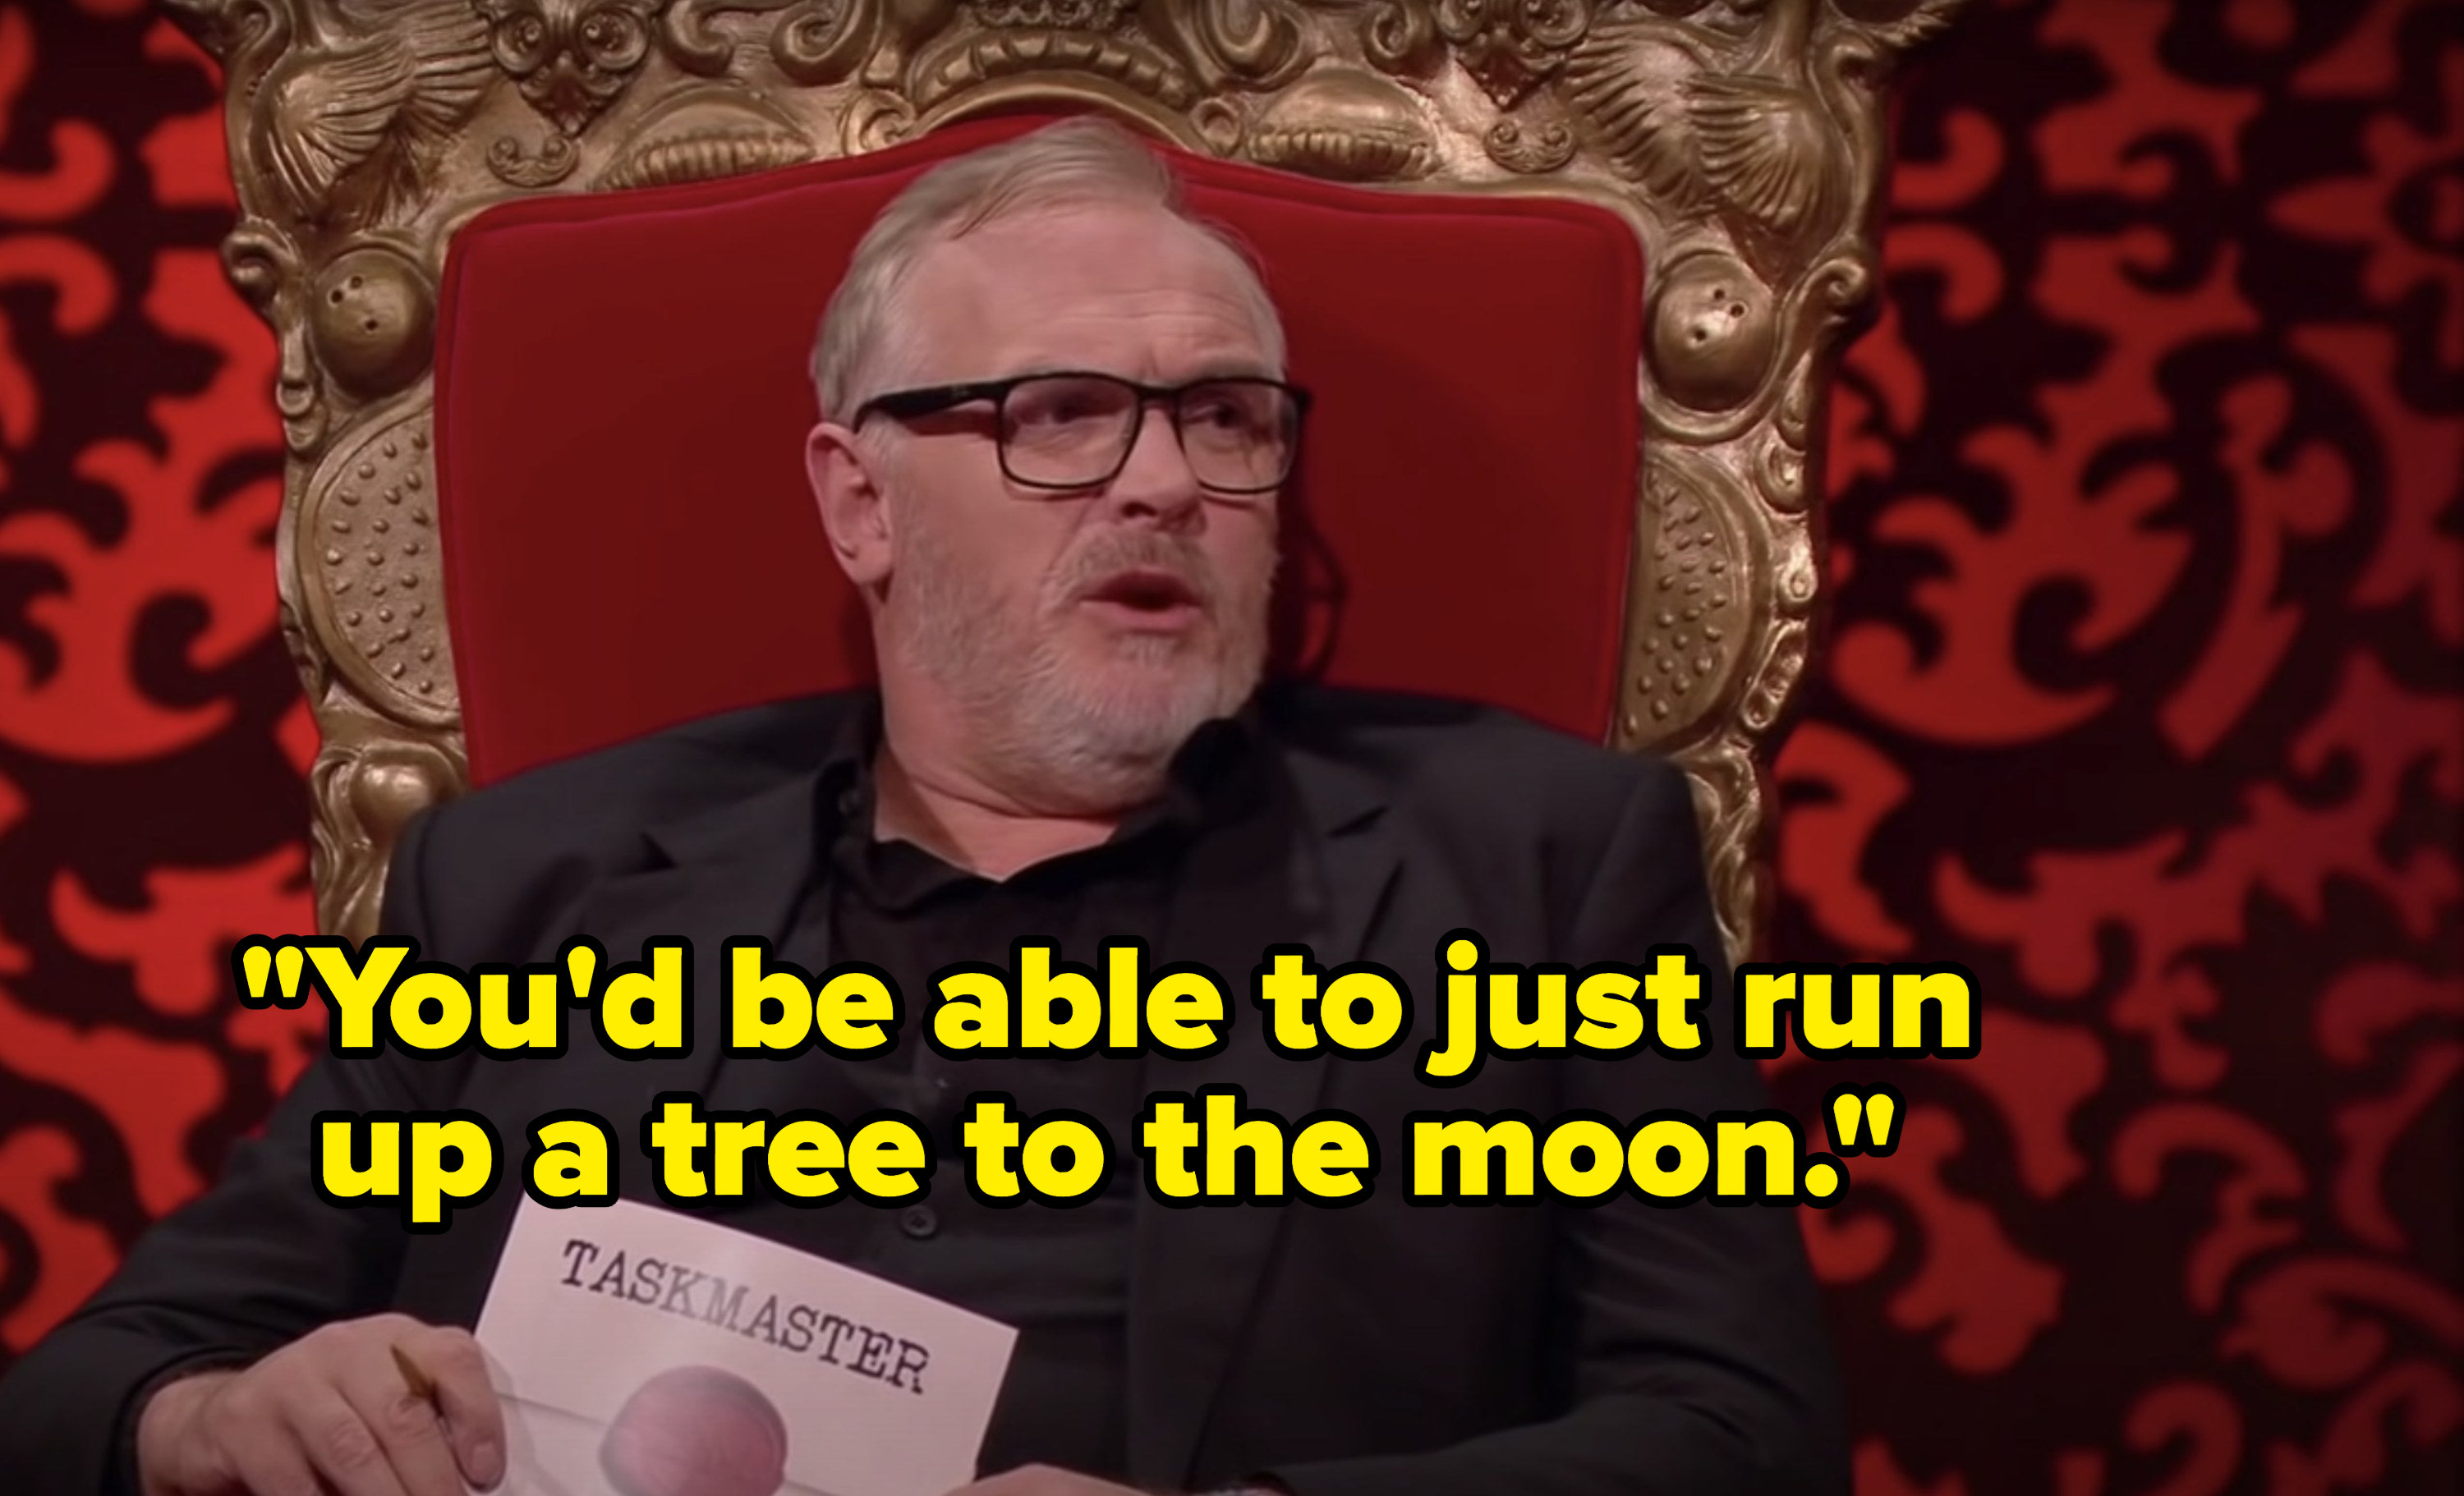 Greg Davies says, Youd be able to just run up a tree to the moon